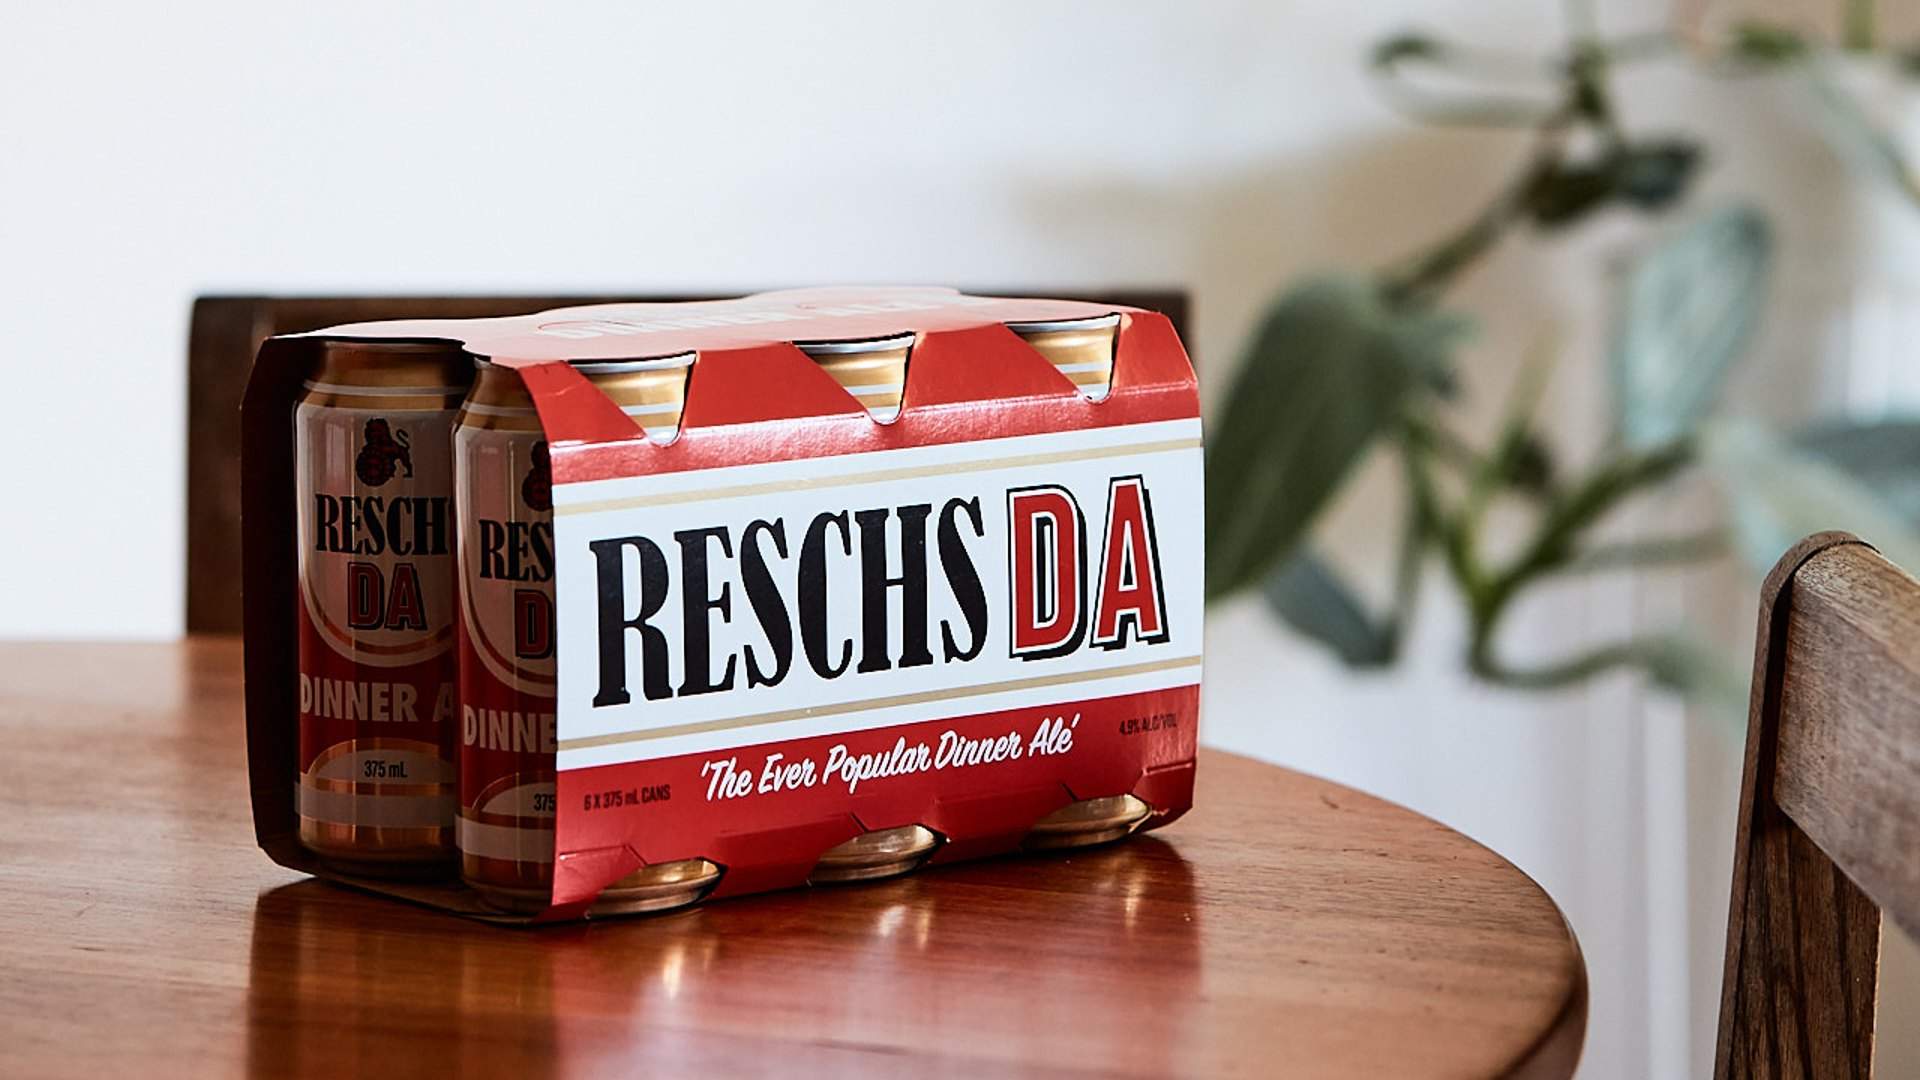 Reschs Is Re-Releasing Its Old-School Favourite Dinner Ale Tinny for a Very Limited Time